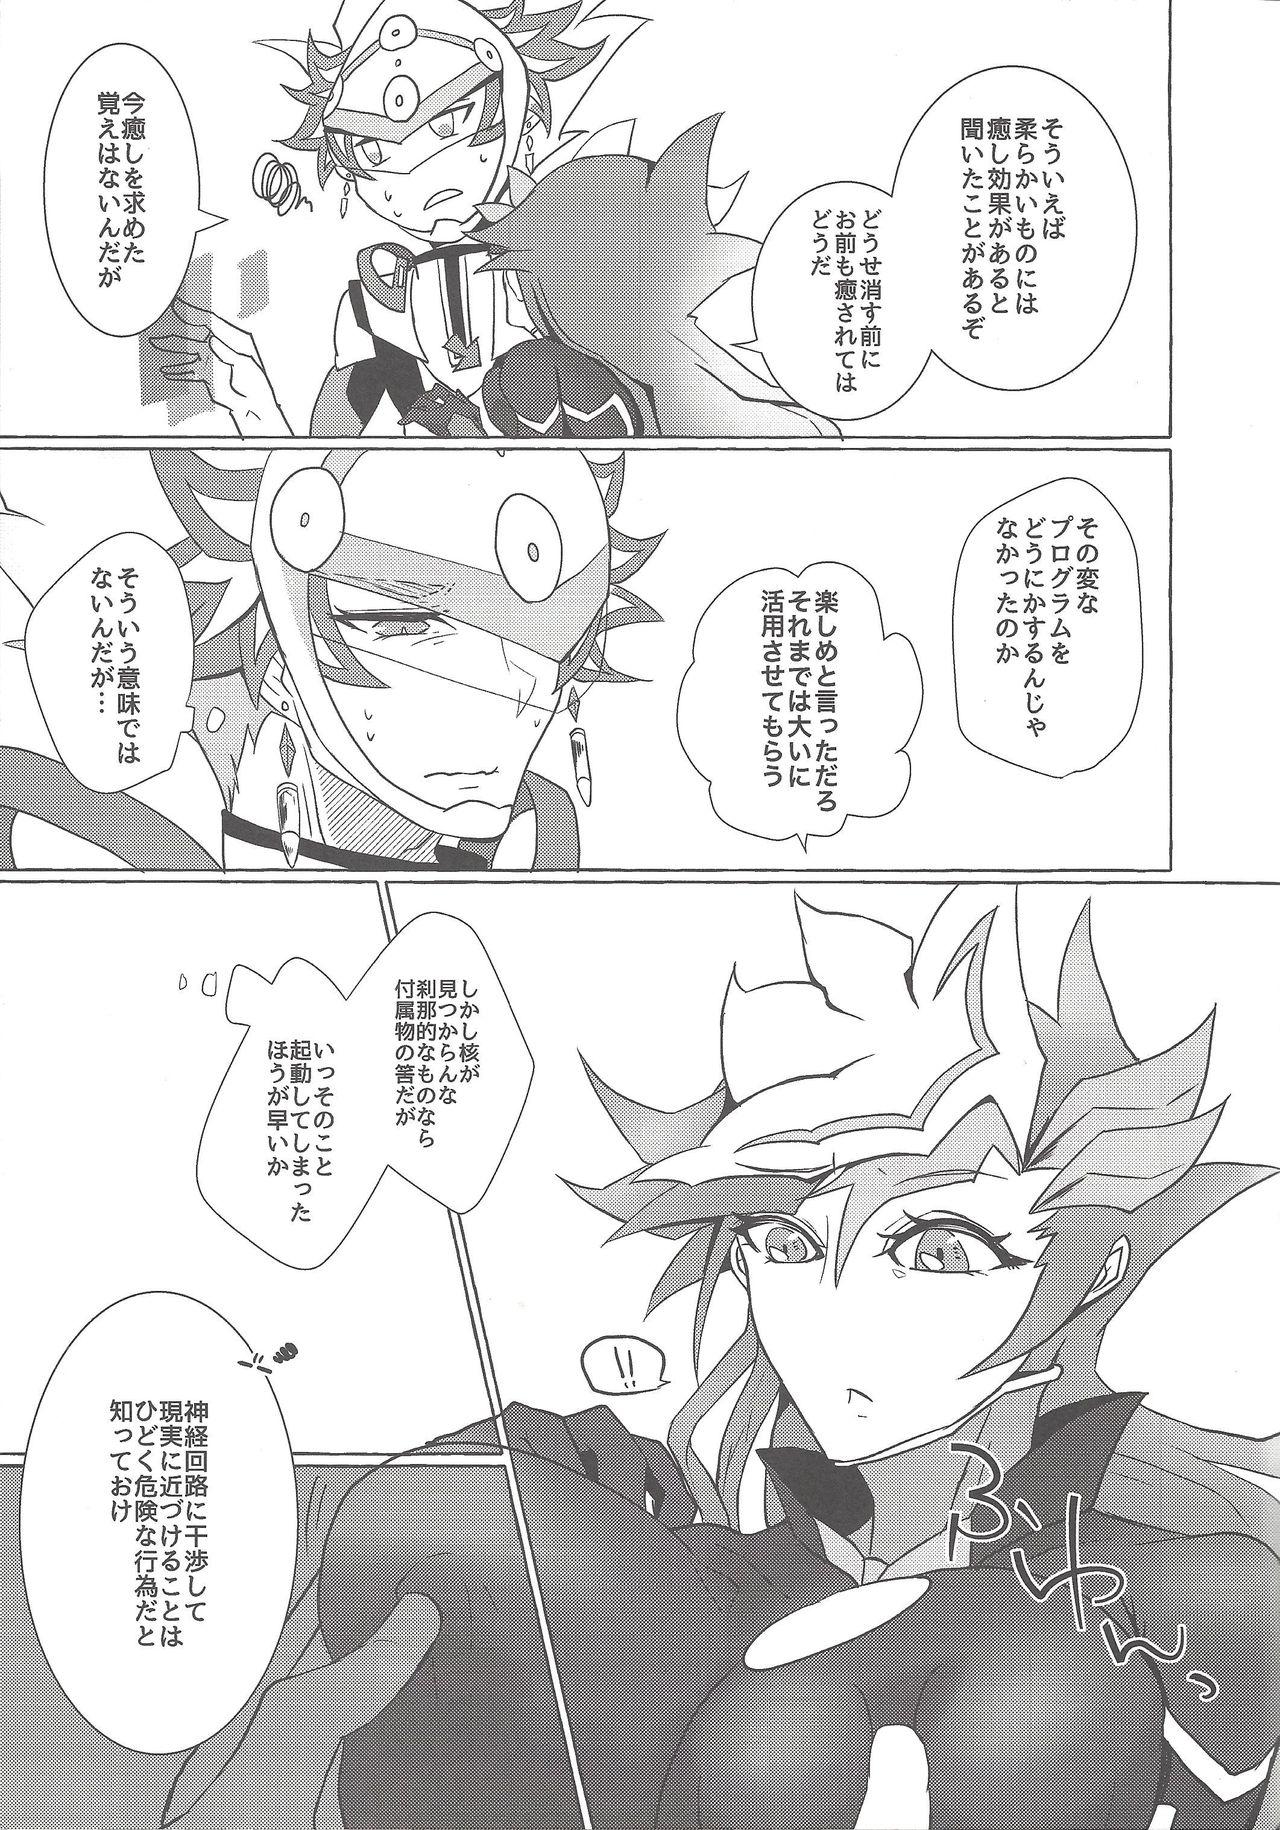 Spy Camera Instant Unreal - Yu-gi-oh vrains Hardcorend - Page 8